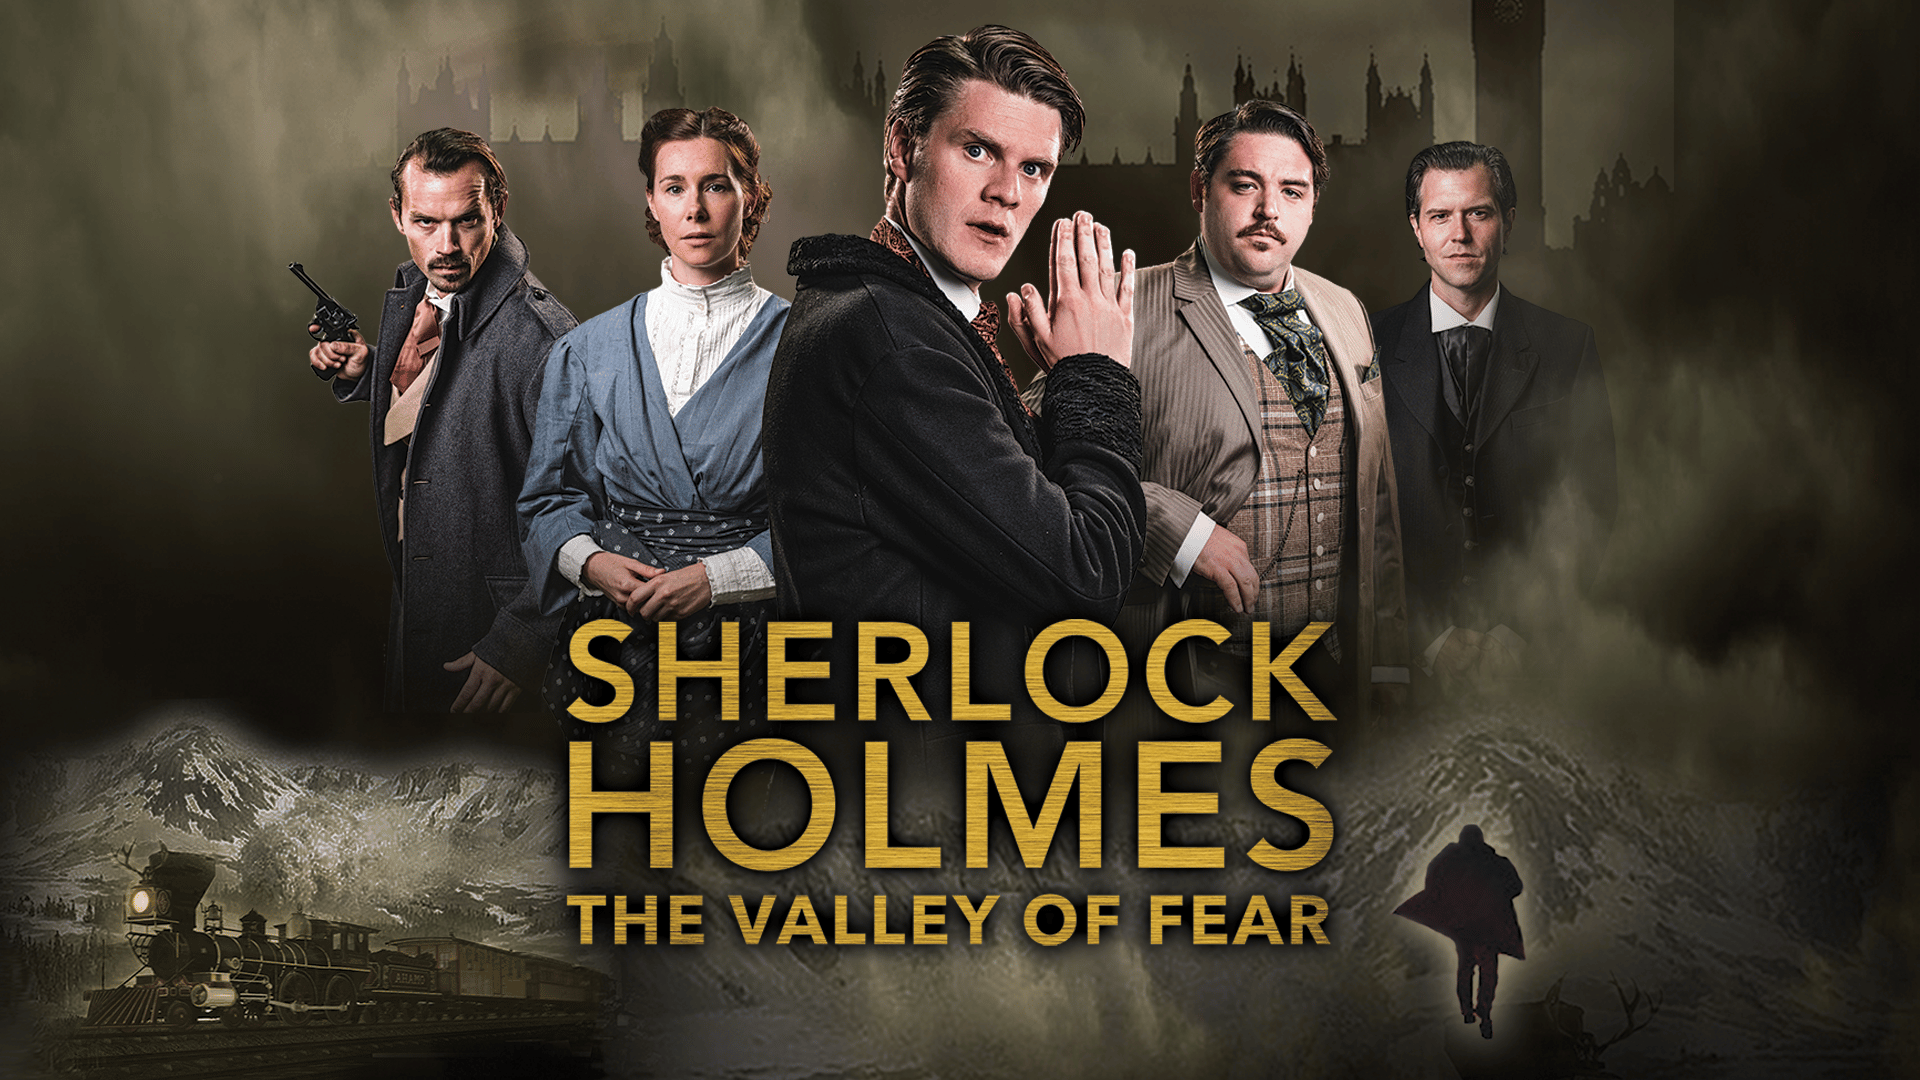 Promotional image Sherlock Holmes the Valley of Fear. Shows a cast of 5 in period dress: Sherlock Holmes in the middle, a woman in a blue dress and a man with a gun on his right, a man in tweed and a man in a black suit on his right. The background has dark sepia colours, through smoke we see the Houses of Parliament, a steam train and snowy mountains. a dark figure with an open coat is running away from us. Text reads: Sherlock Holmes The Valley of Fear